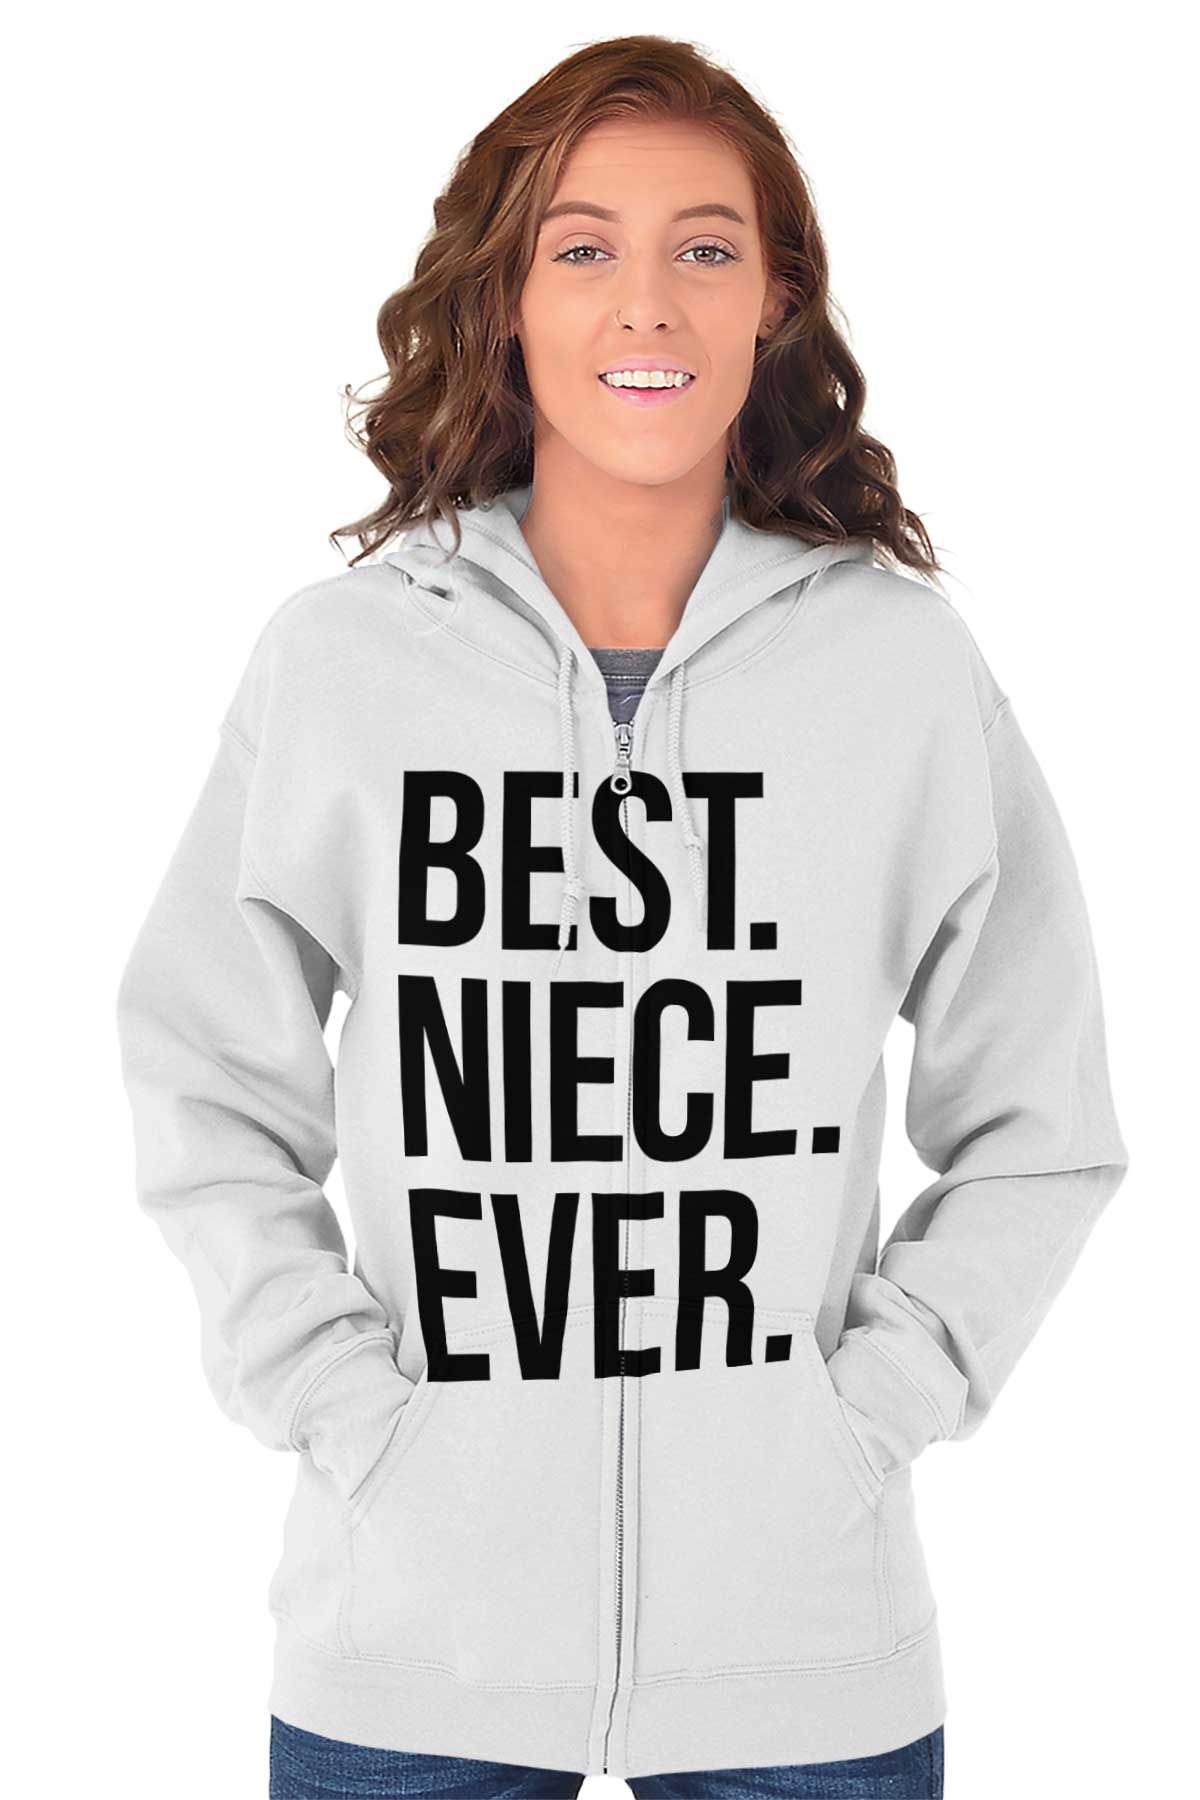 Best Relative Ever Womens Zipper Hoodies Sweat Shirts Best Niece Ever Family Relative Aunt Uncle - image 1 of 2